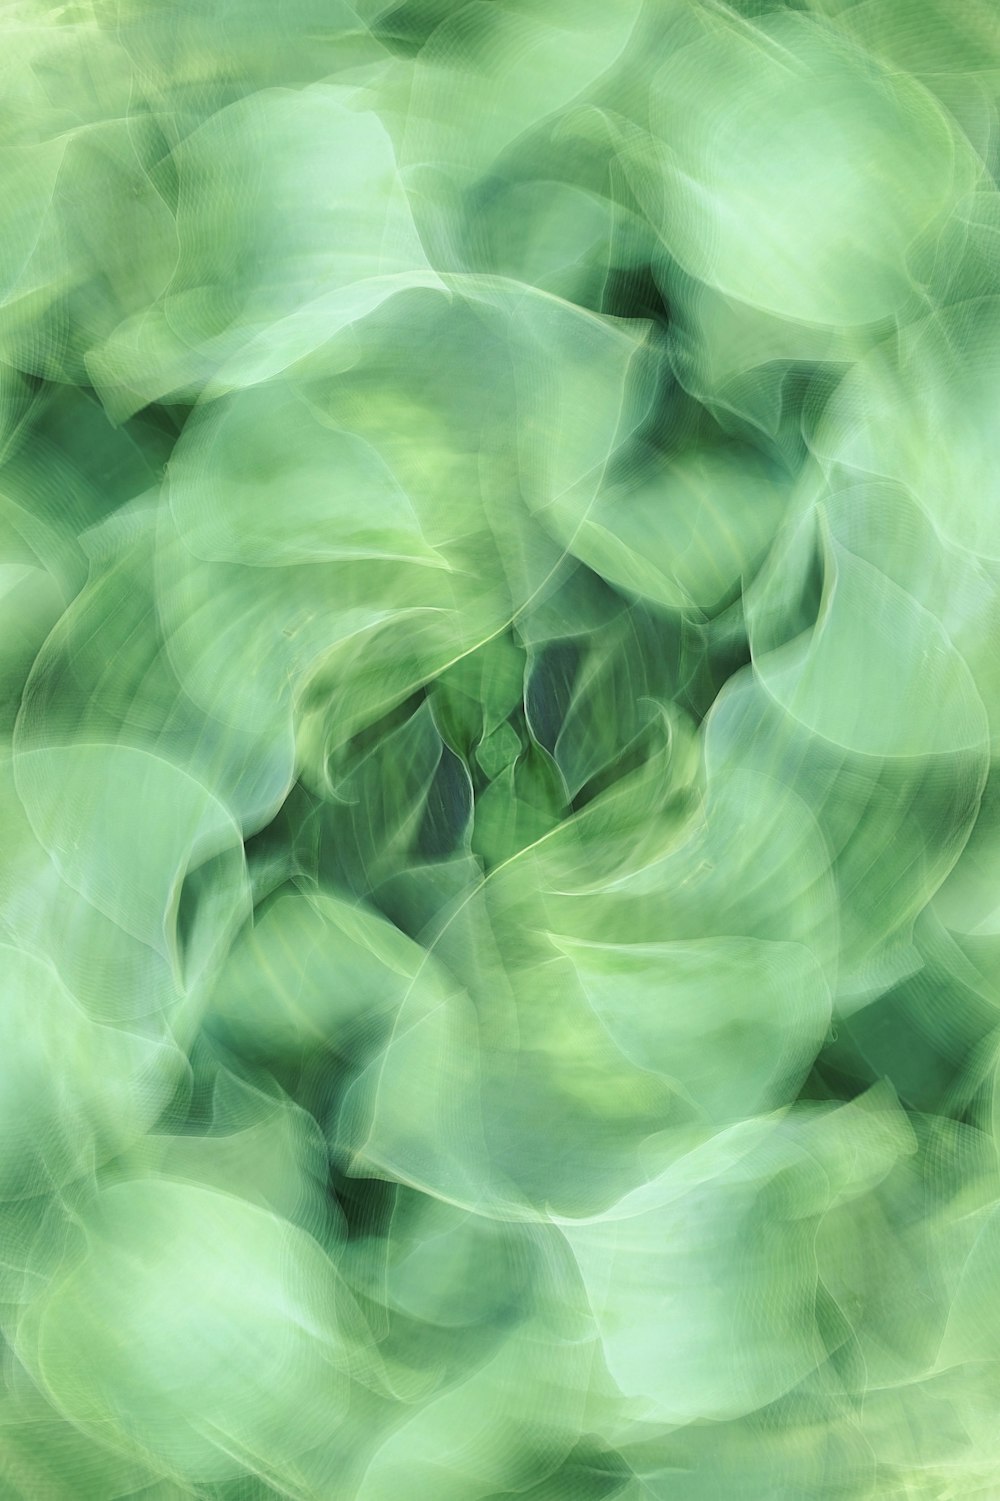 a blurry photo of a green plant